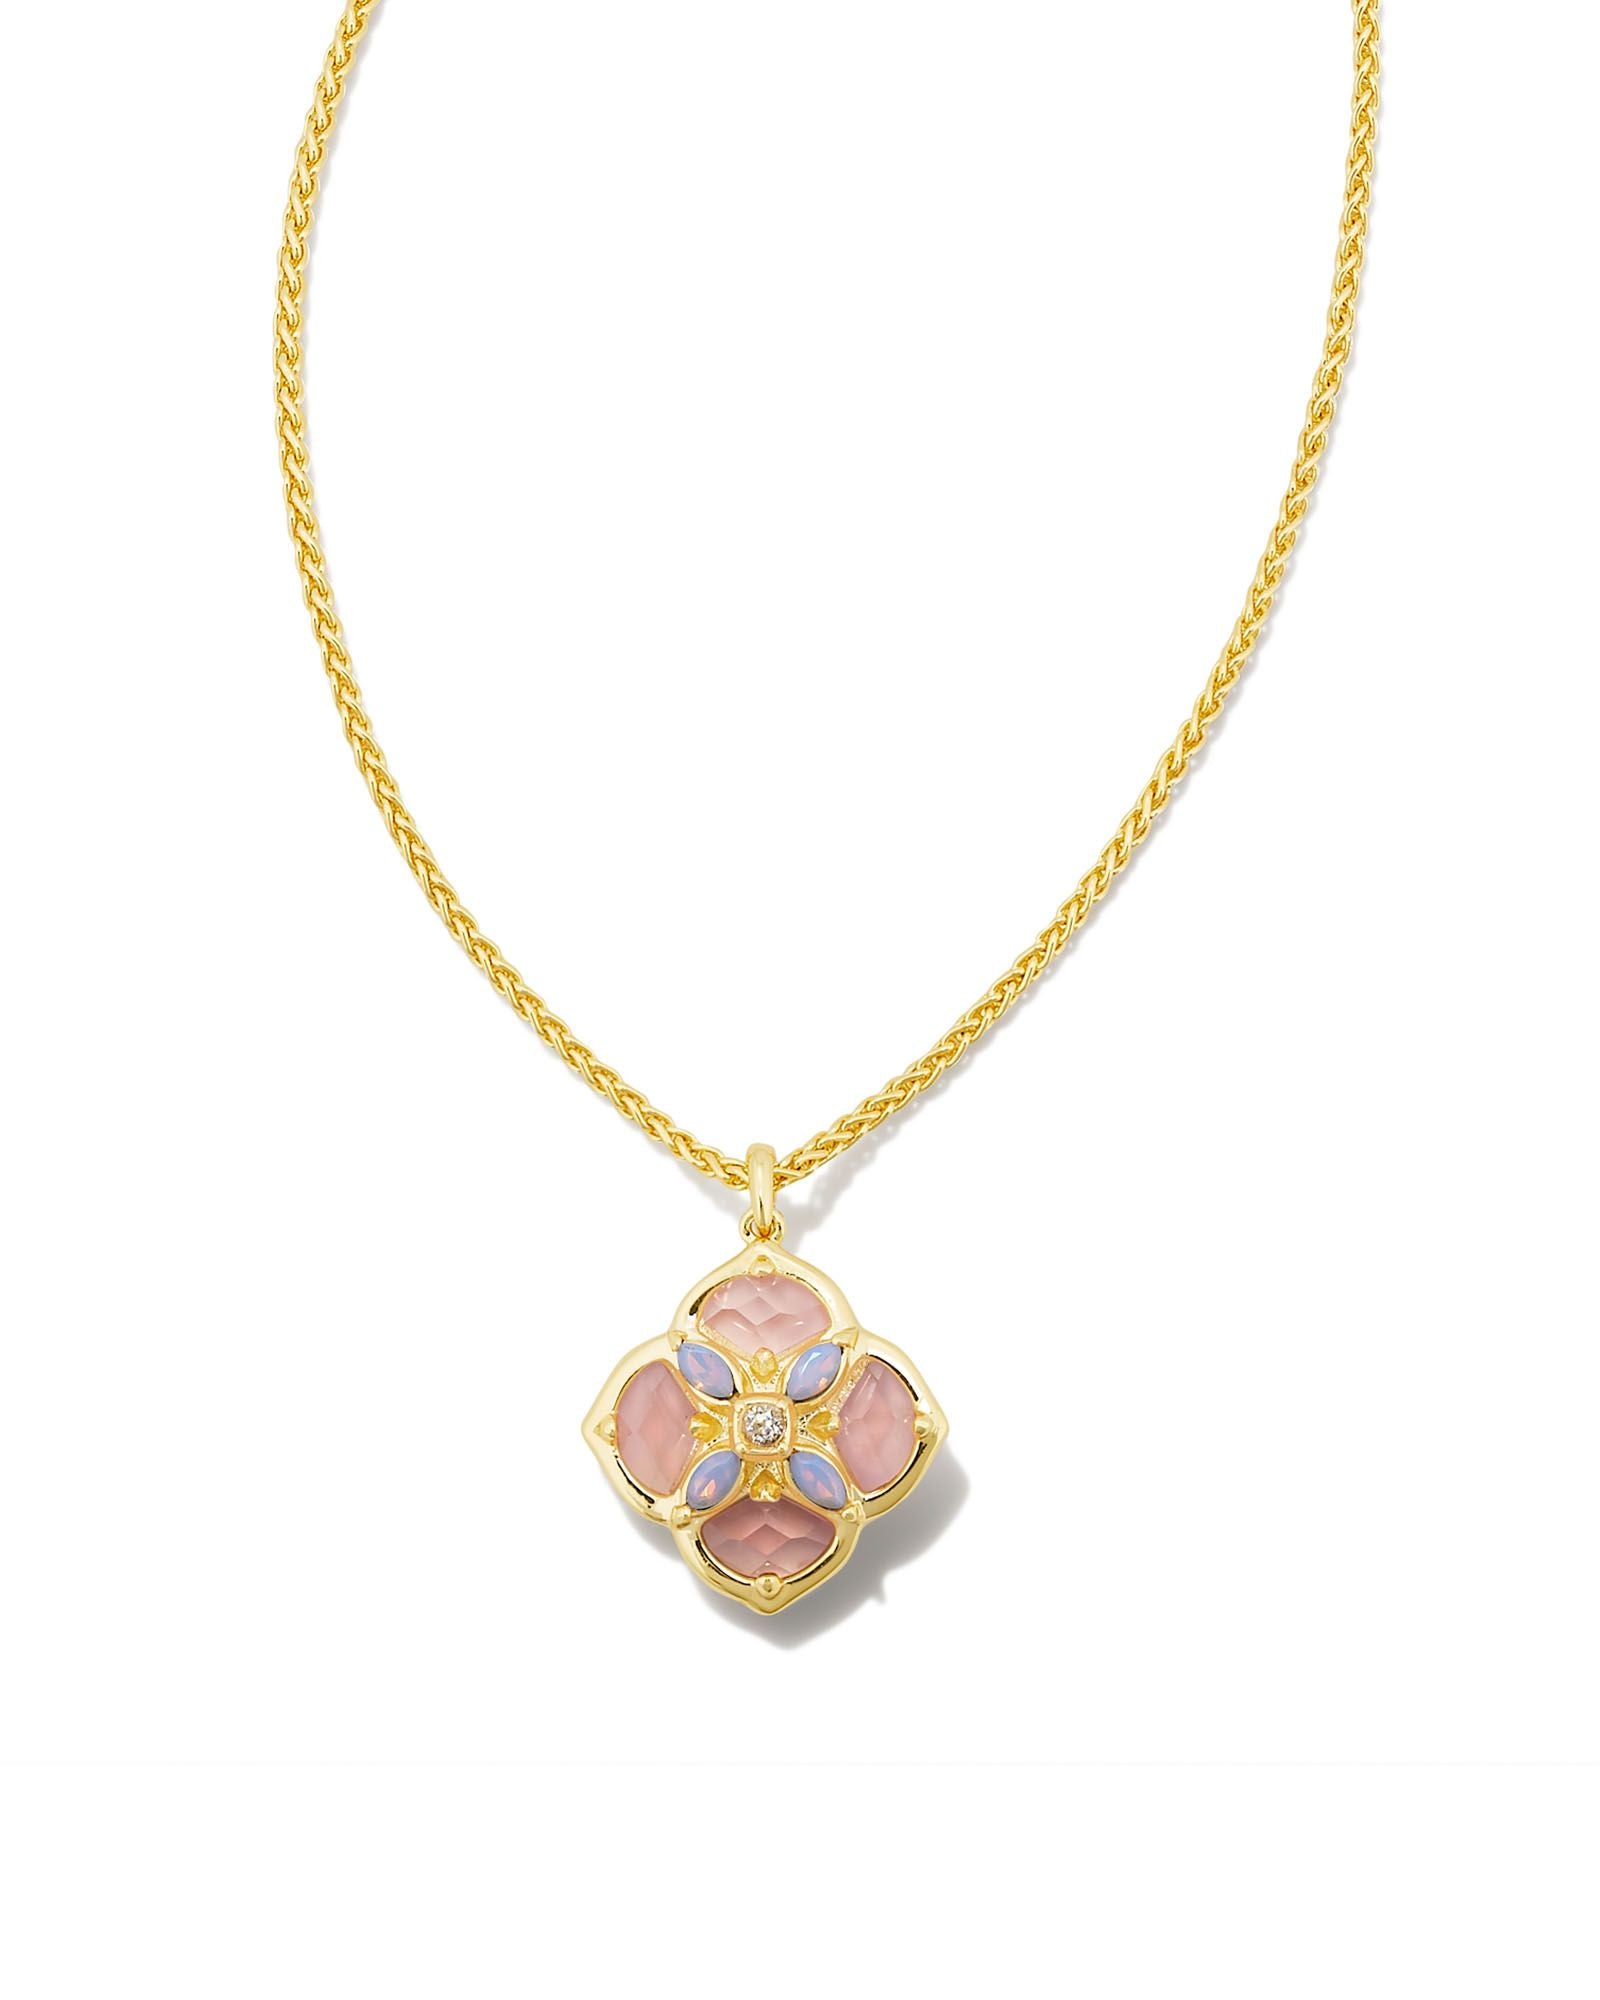 Dira Stone Short Pendant Necklace in Gold Pink Mix